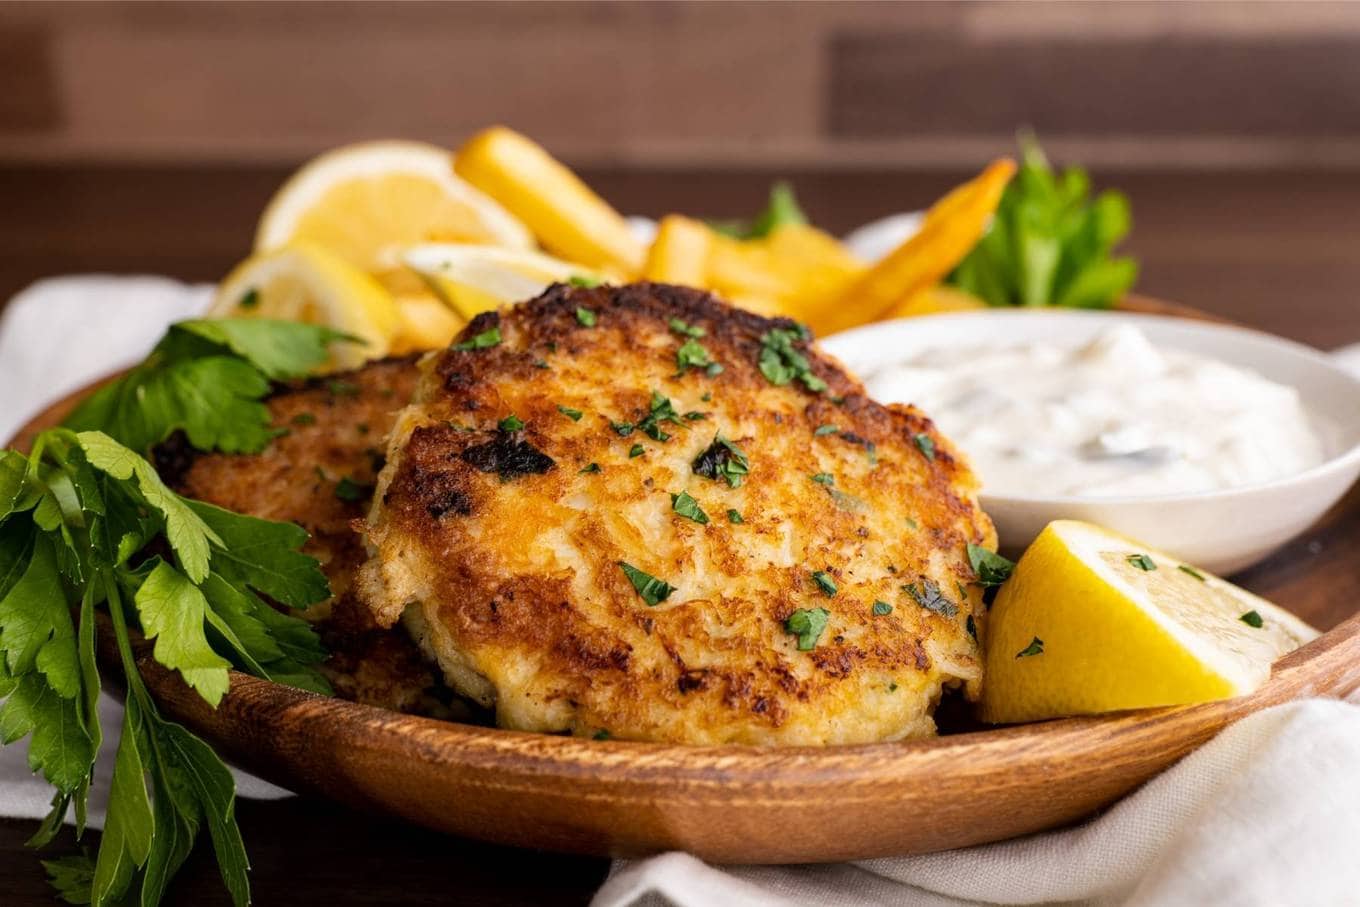 Crab Cakes on plate with lemon wedge